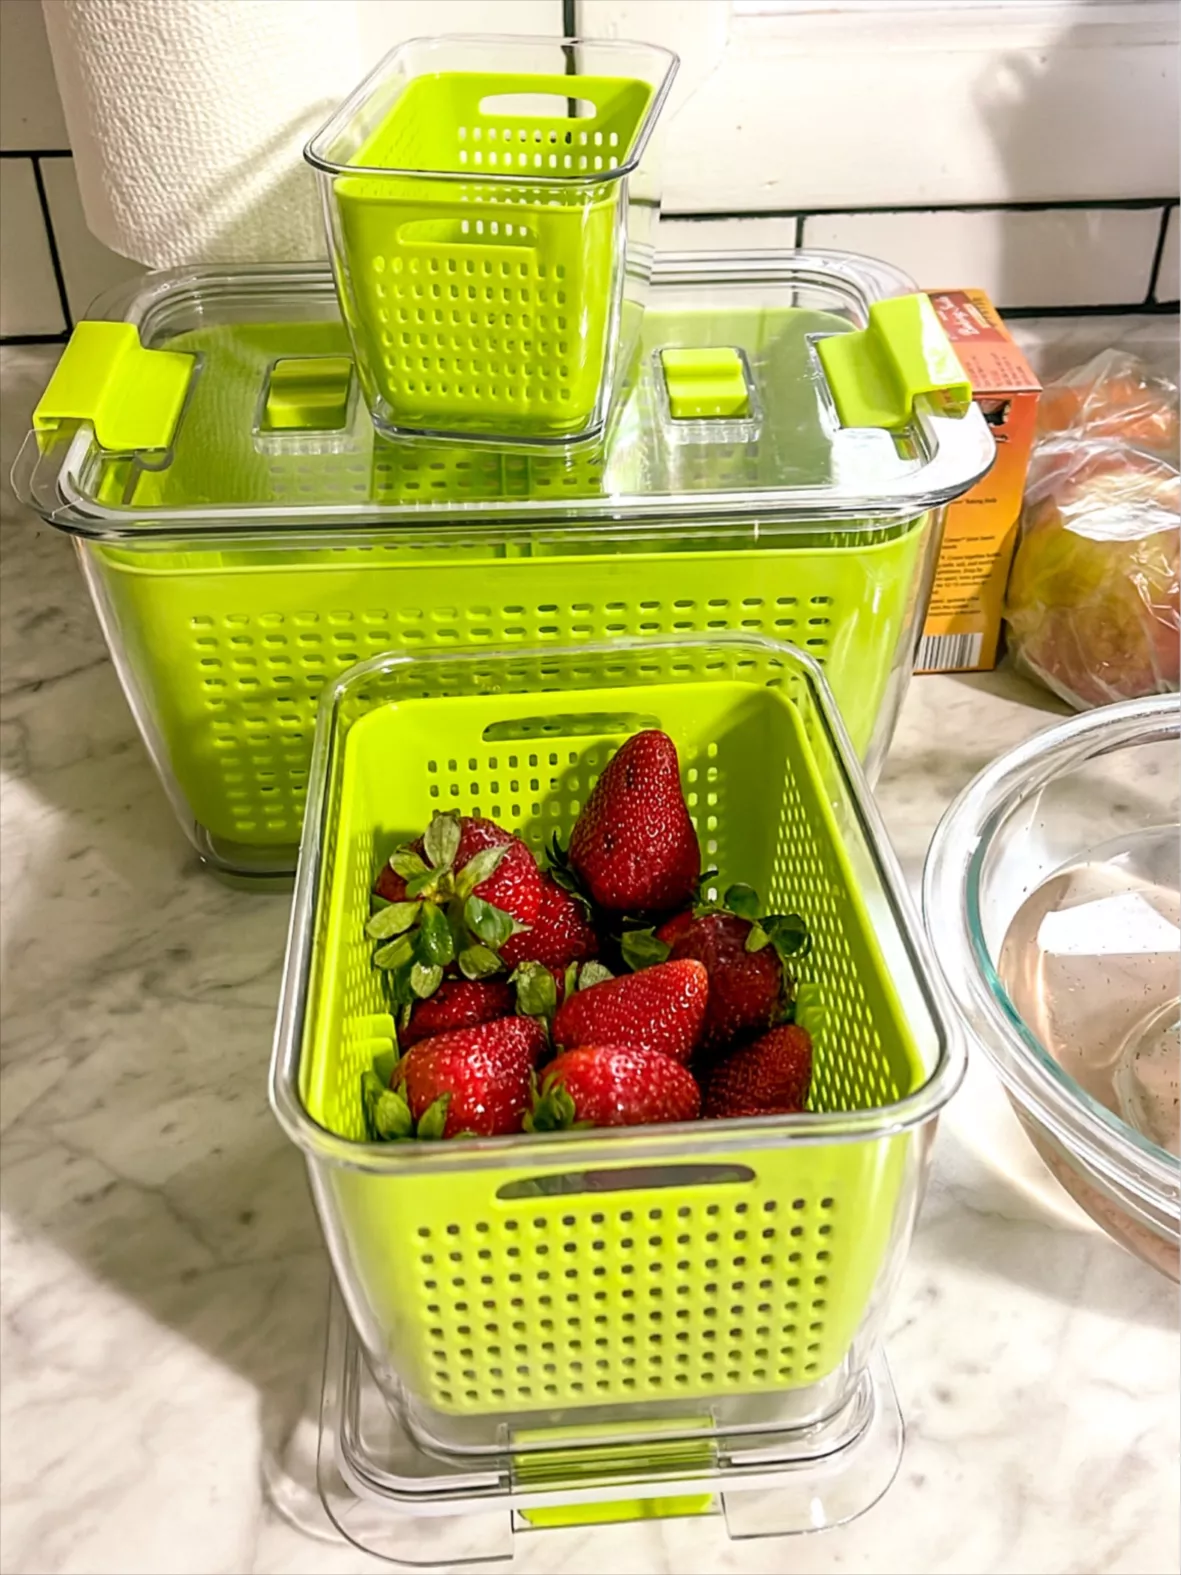 Luxear Fresh Food Storage Containers, 3 Pack Fridge Storage